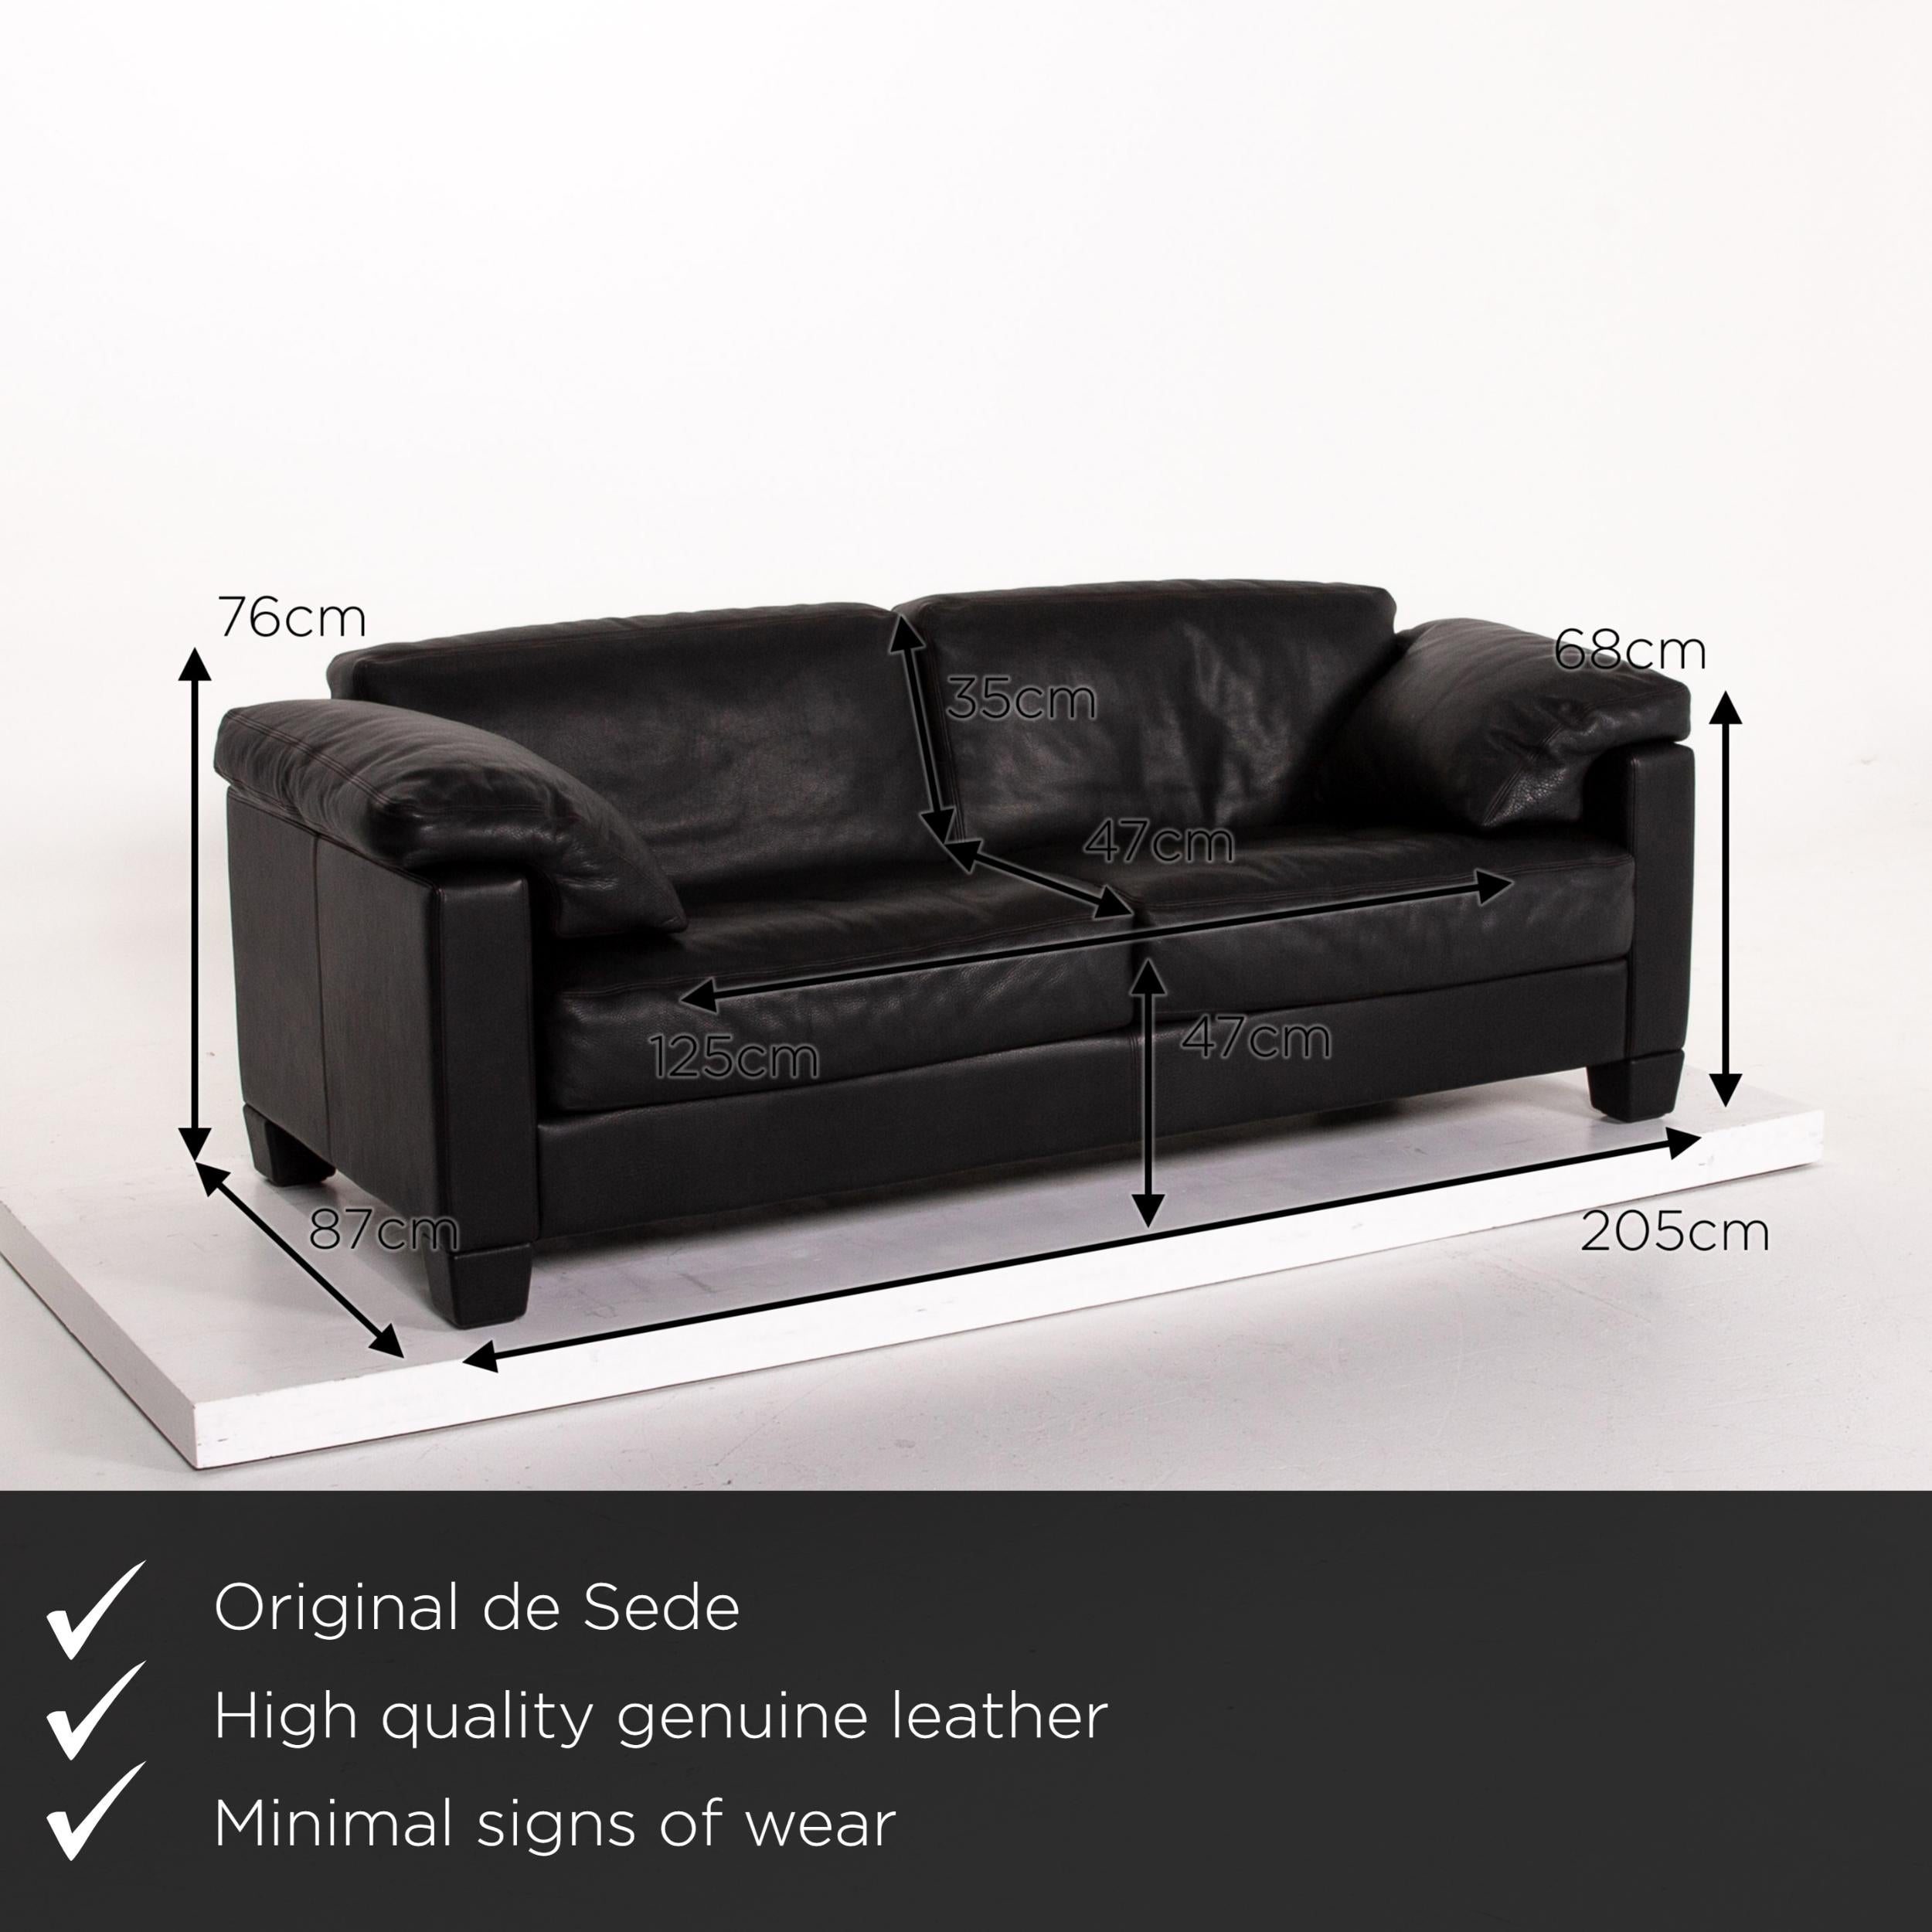 We present to you a De Sede DS 17 leather sofa black two-seat couch.

Product measurements in centimeters:

Depth 87
Width 205
Height 76
Seat height 47
Rest height 68
Seat depth 47
Seat width 125
Back height 35.
 
 
 
   